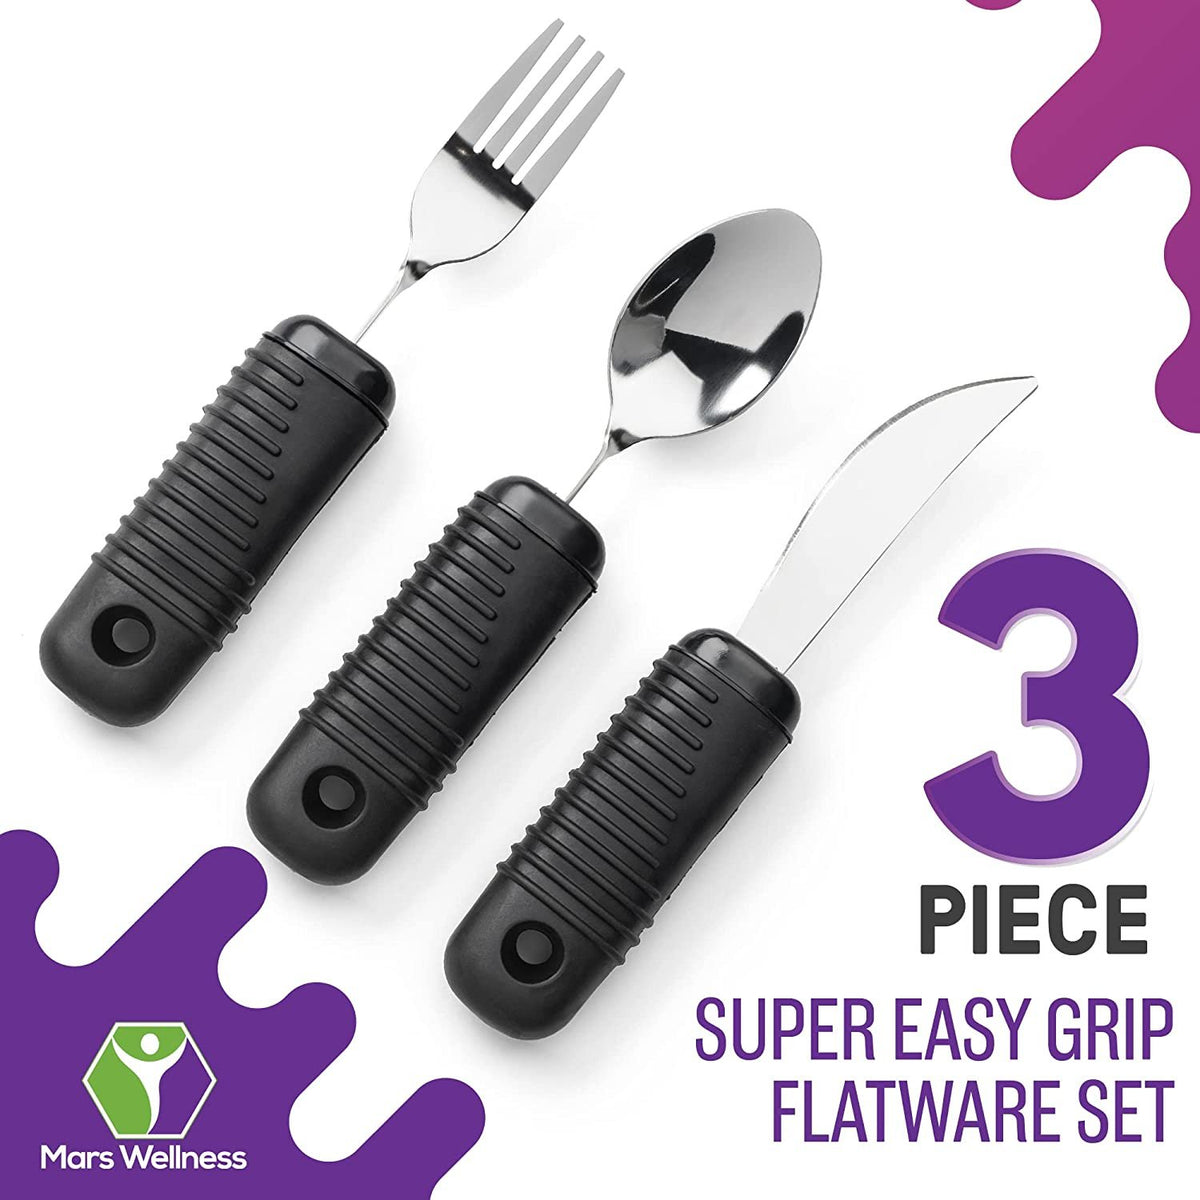 Mars Wellness Weighted Utensils Set - 3-Piece Heavy Duty, Stainless Steel Fork, Knife, and Spoon Adaptive Utensils Enhanced Stability While Eating for Elderly, Hand Tremors and Parkinson's Patients